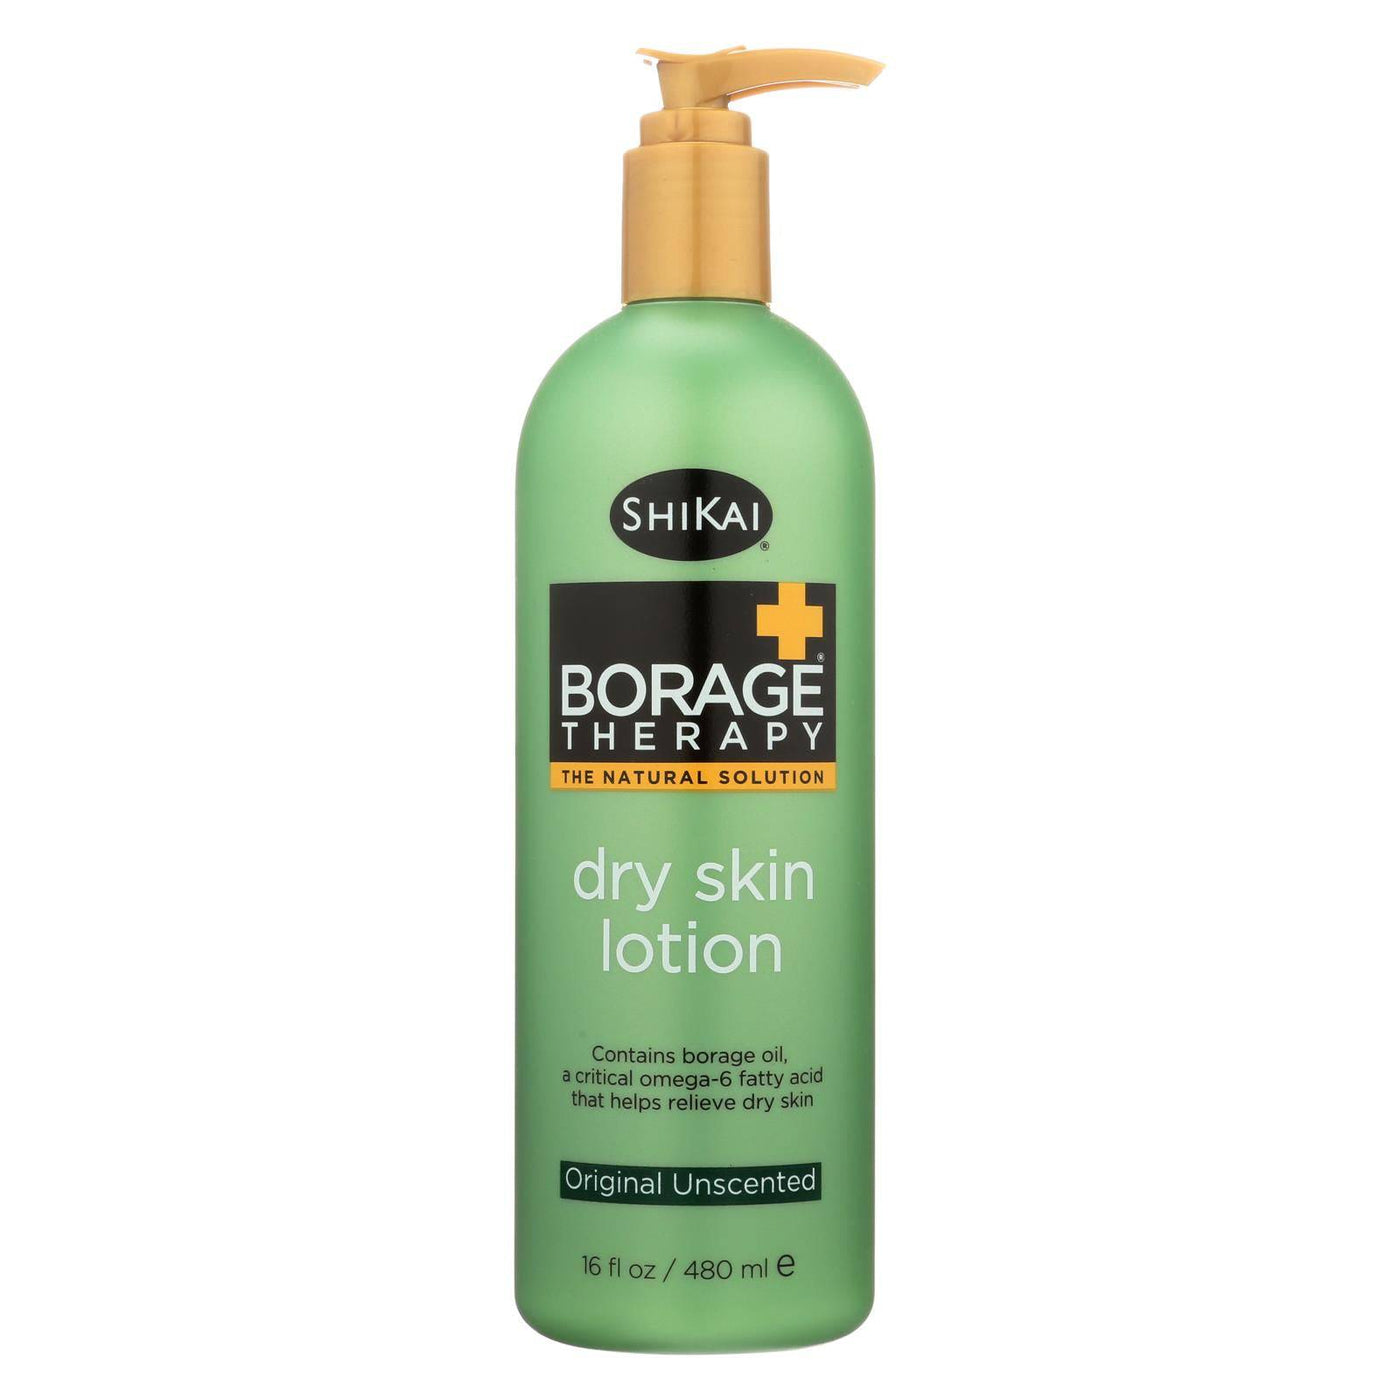 Shikai Borage Therapy Dry Skin Lotion Unscented - 16 Fl Oz | OnlyNaturals.us